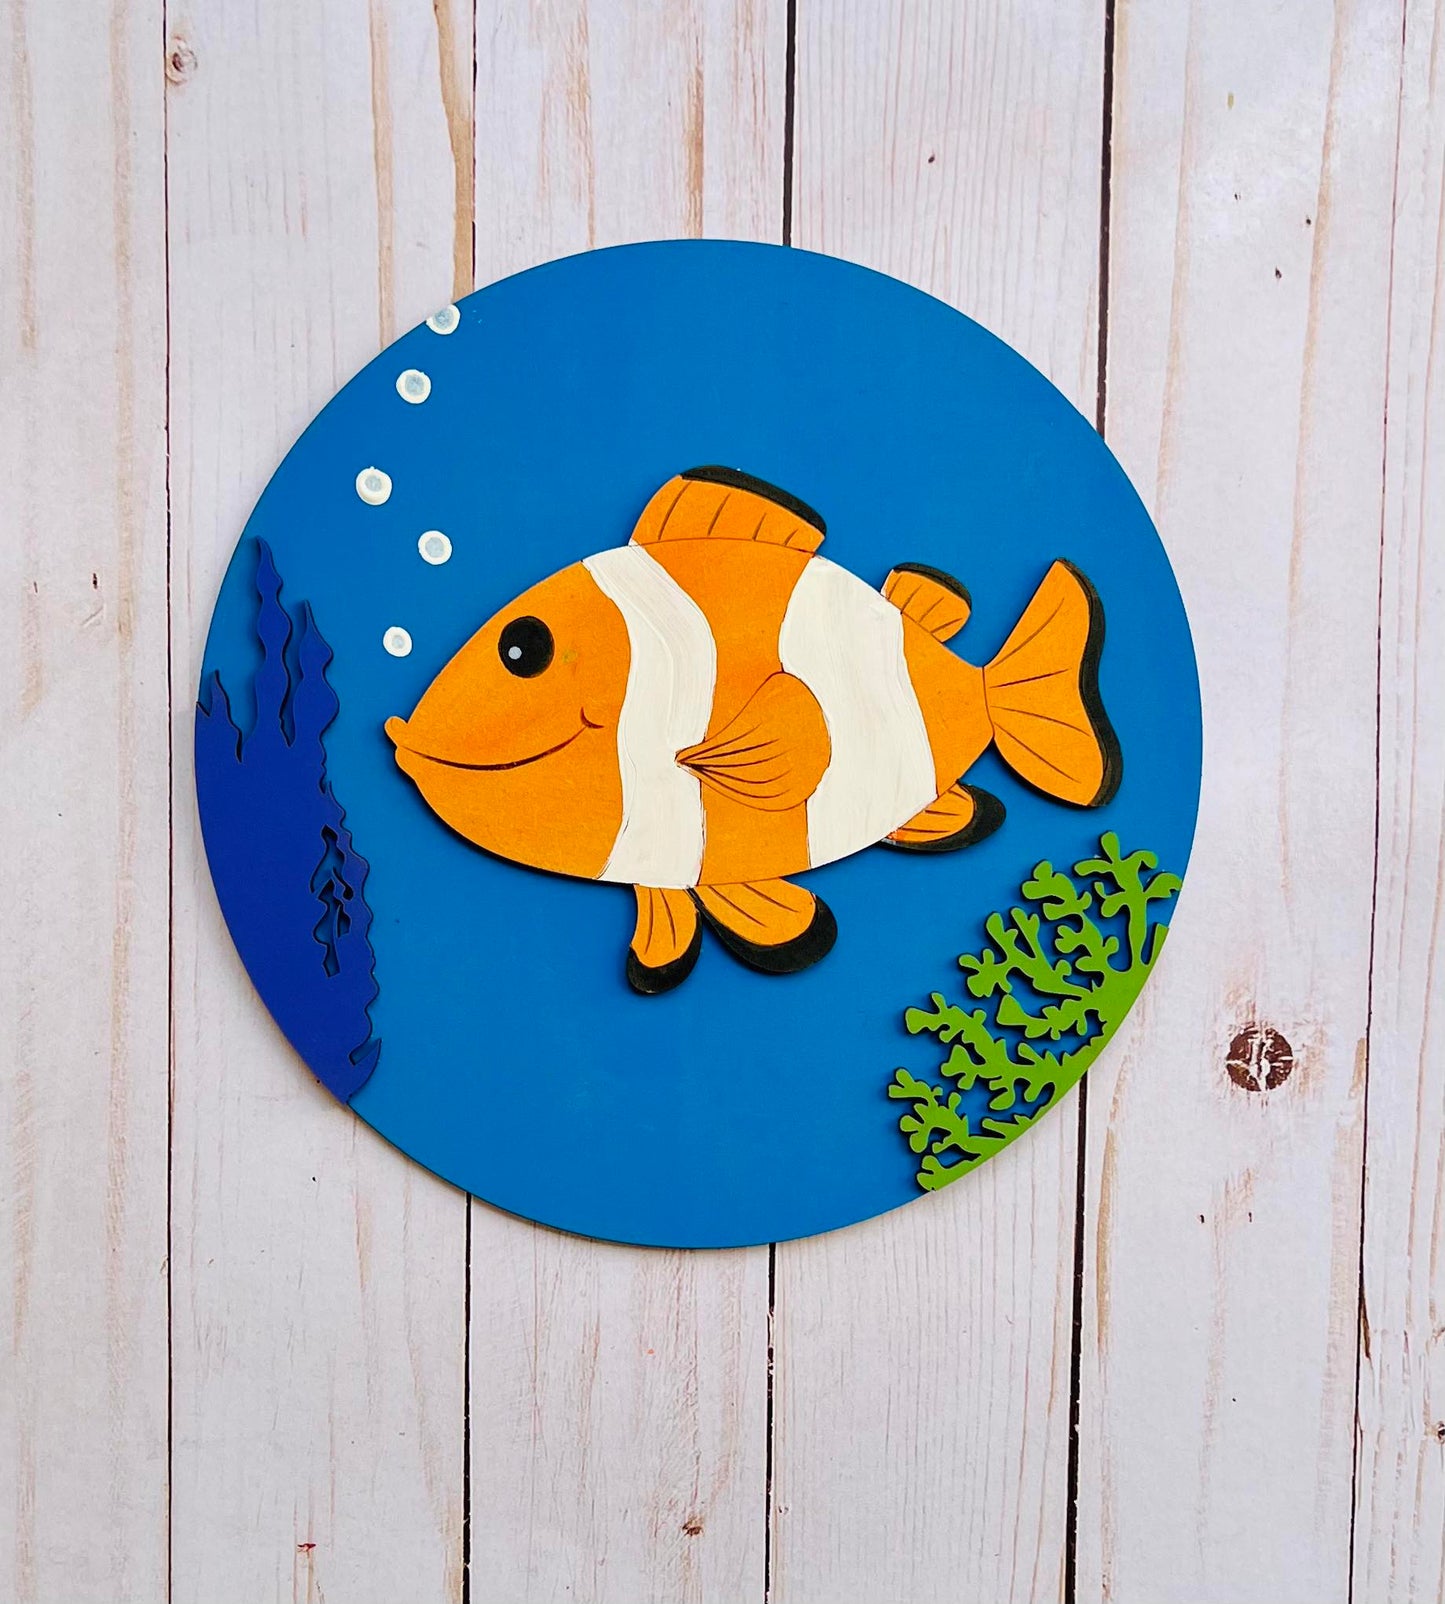 CLOWN FISH - New Creations By Kid's Ready to Paint Kit